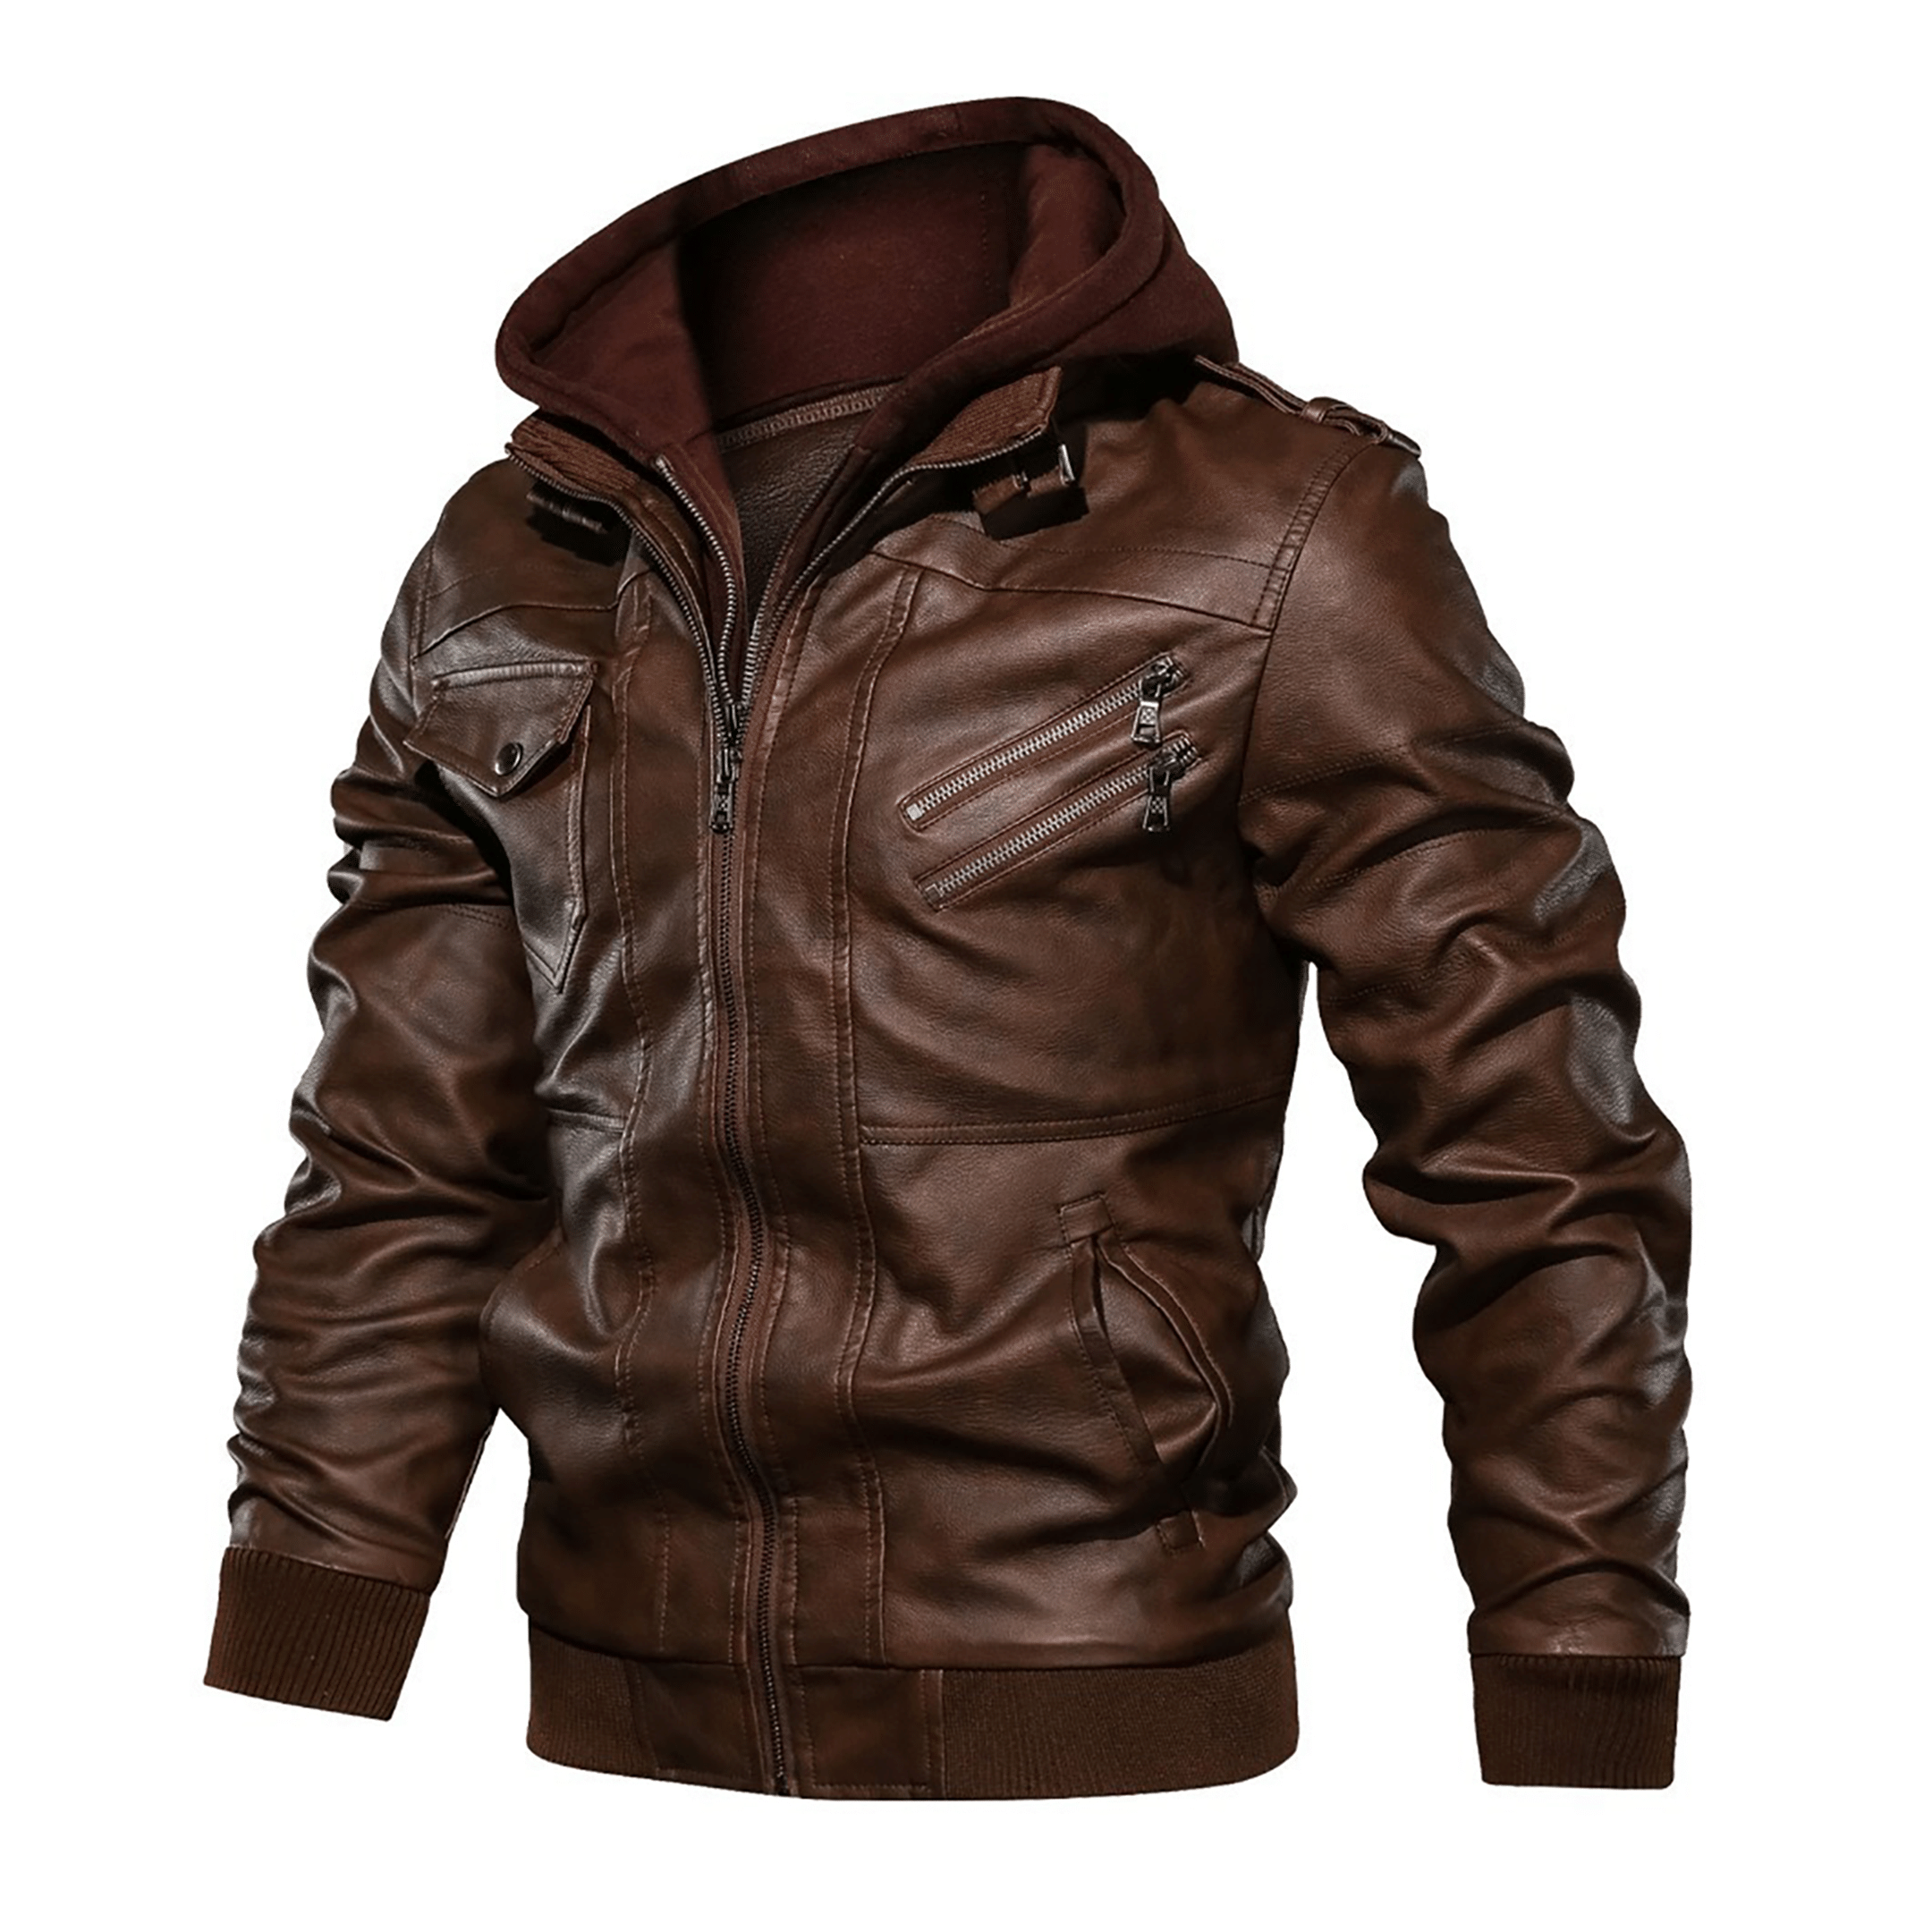 Top leather jackets and latest products 103